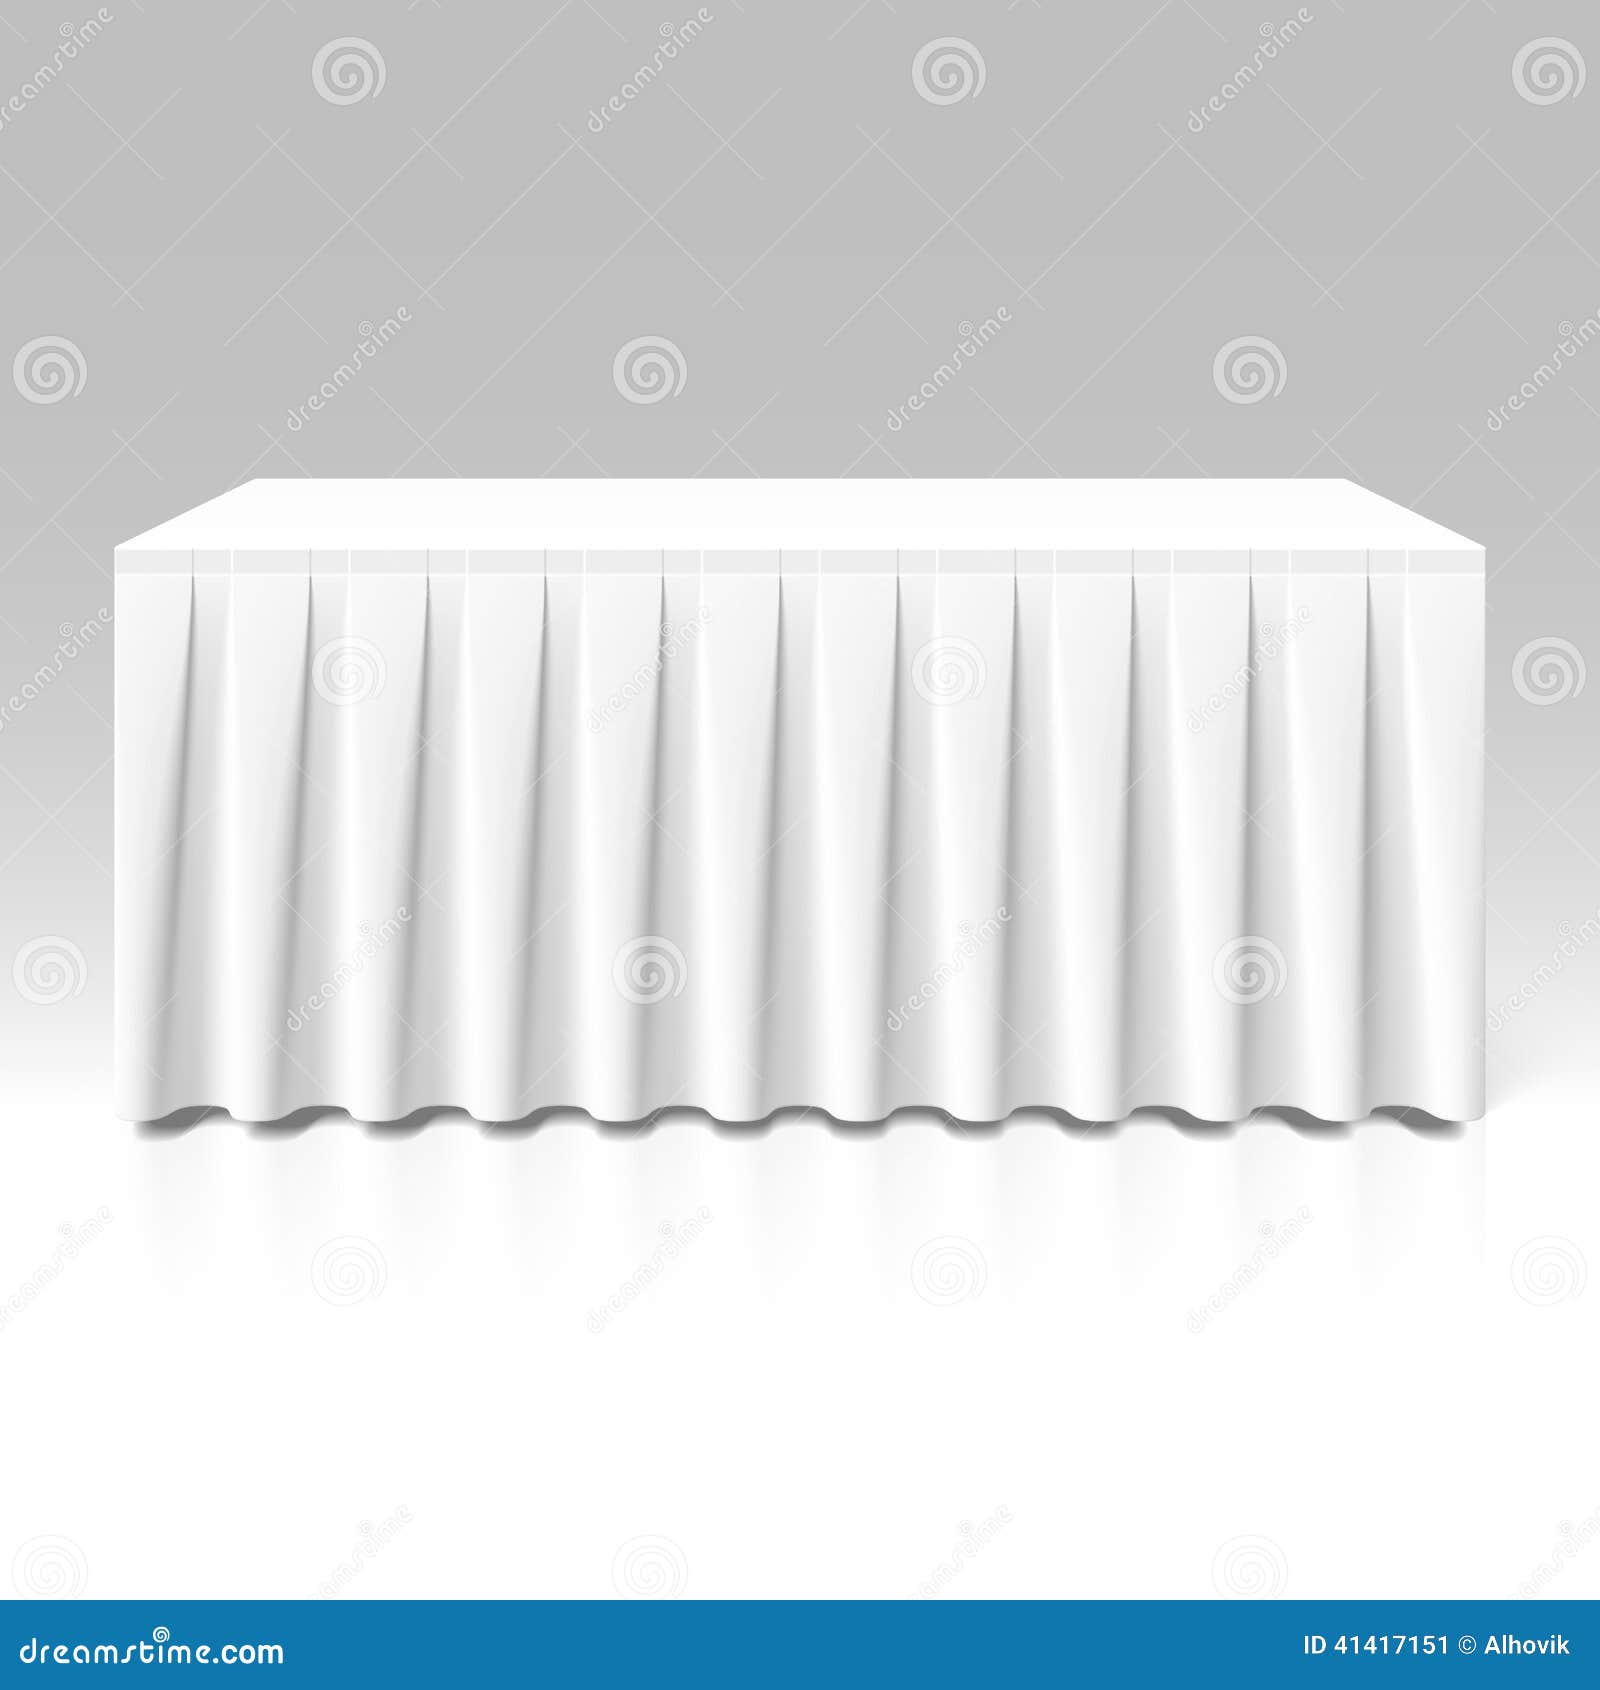 Table skirting | PPT